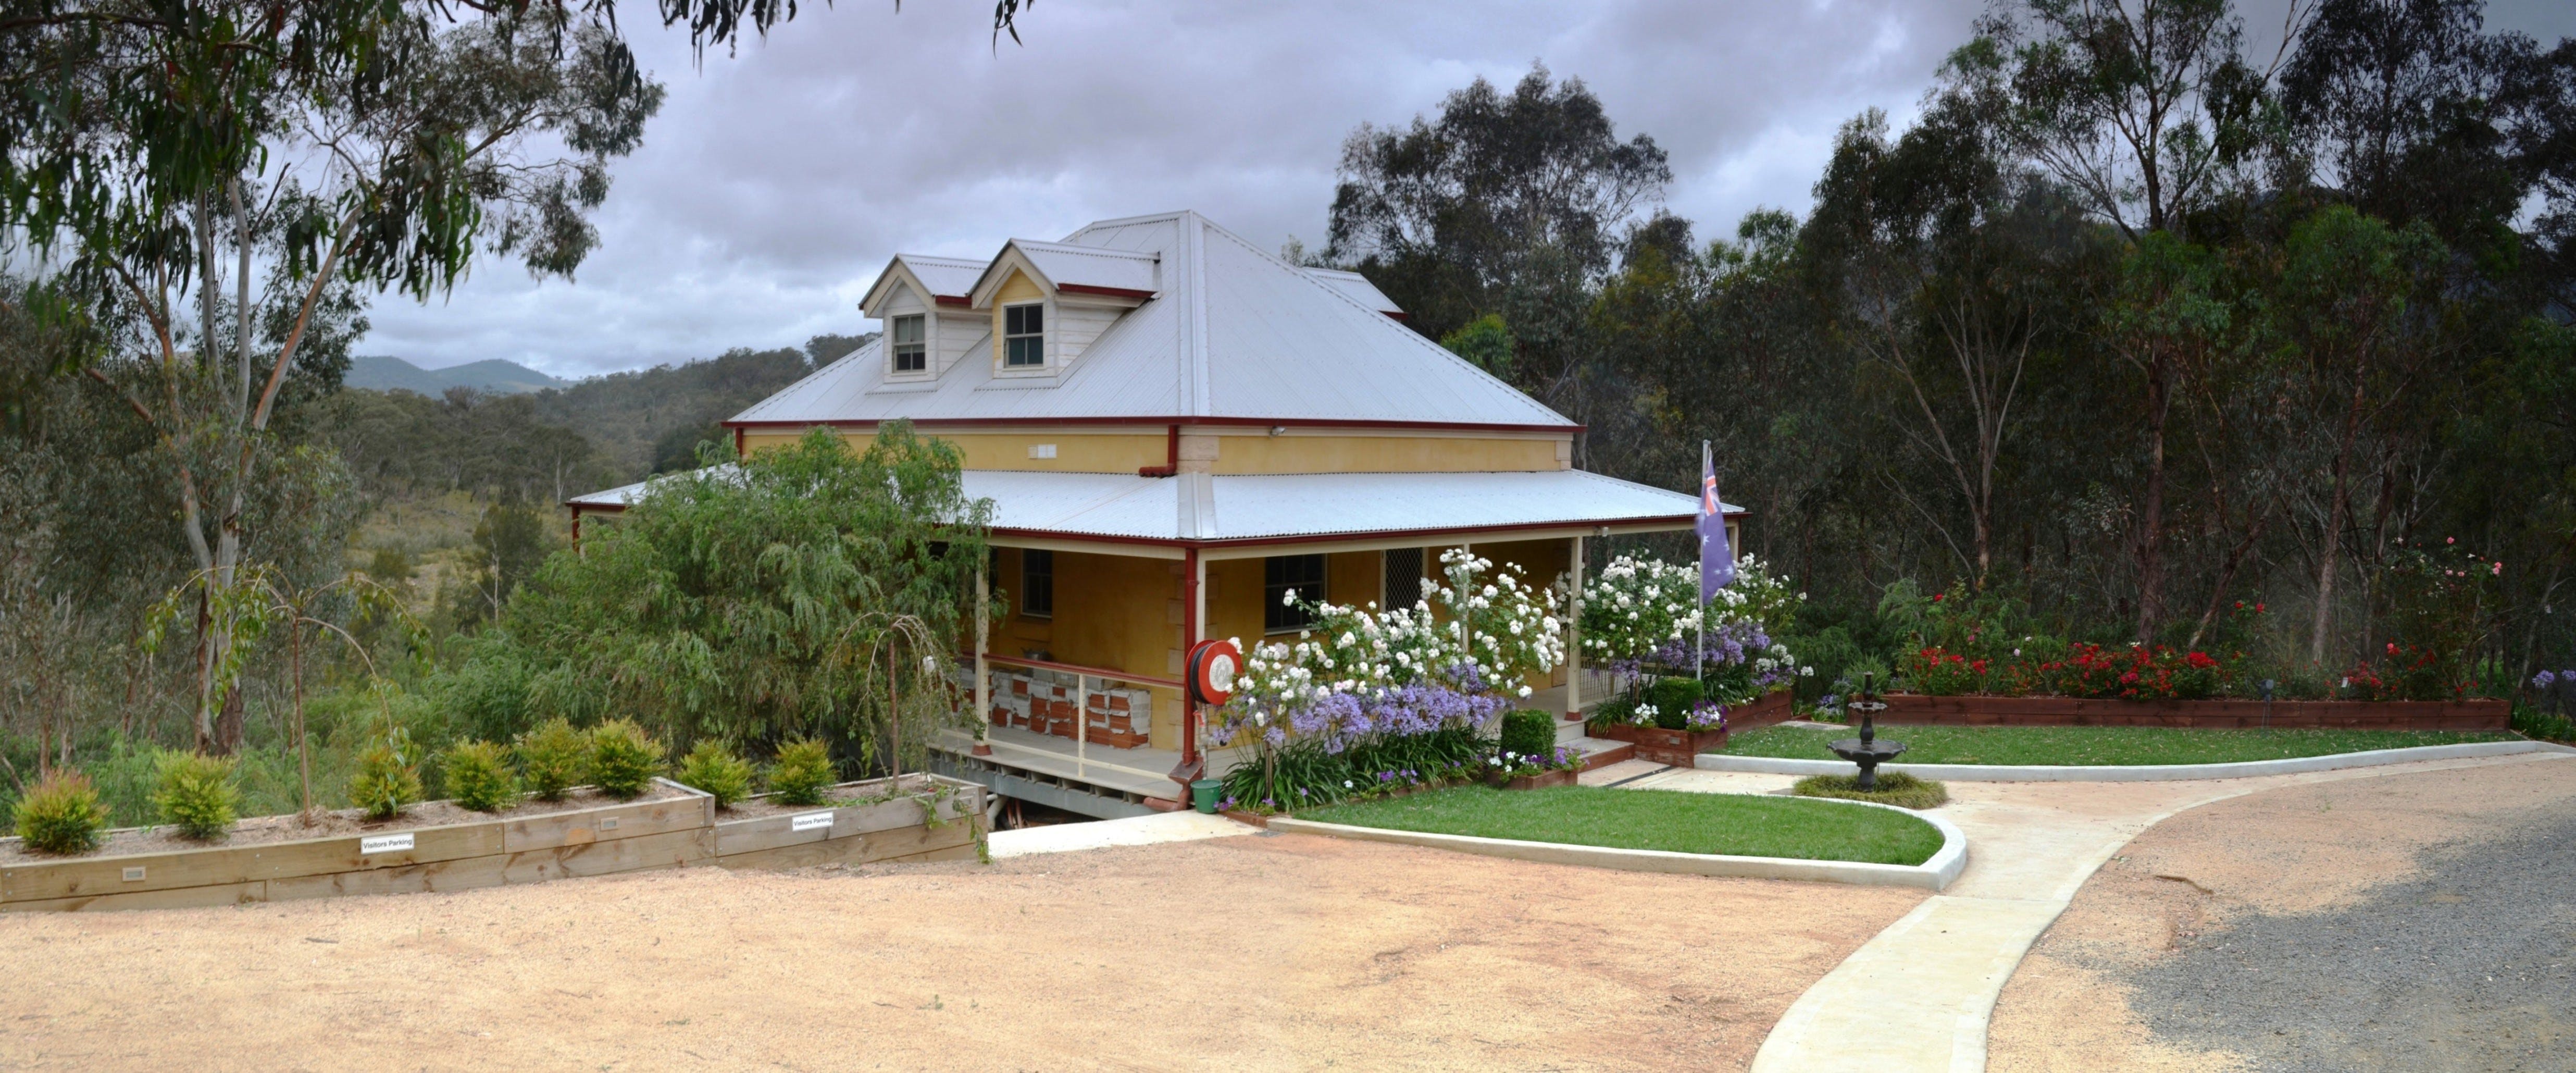 Tanwarra Lodge Bed and Breakfast - Coogee Beach Accommodation